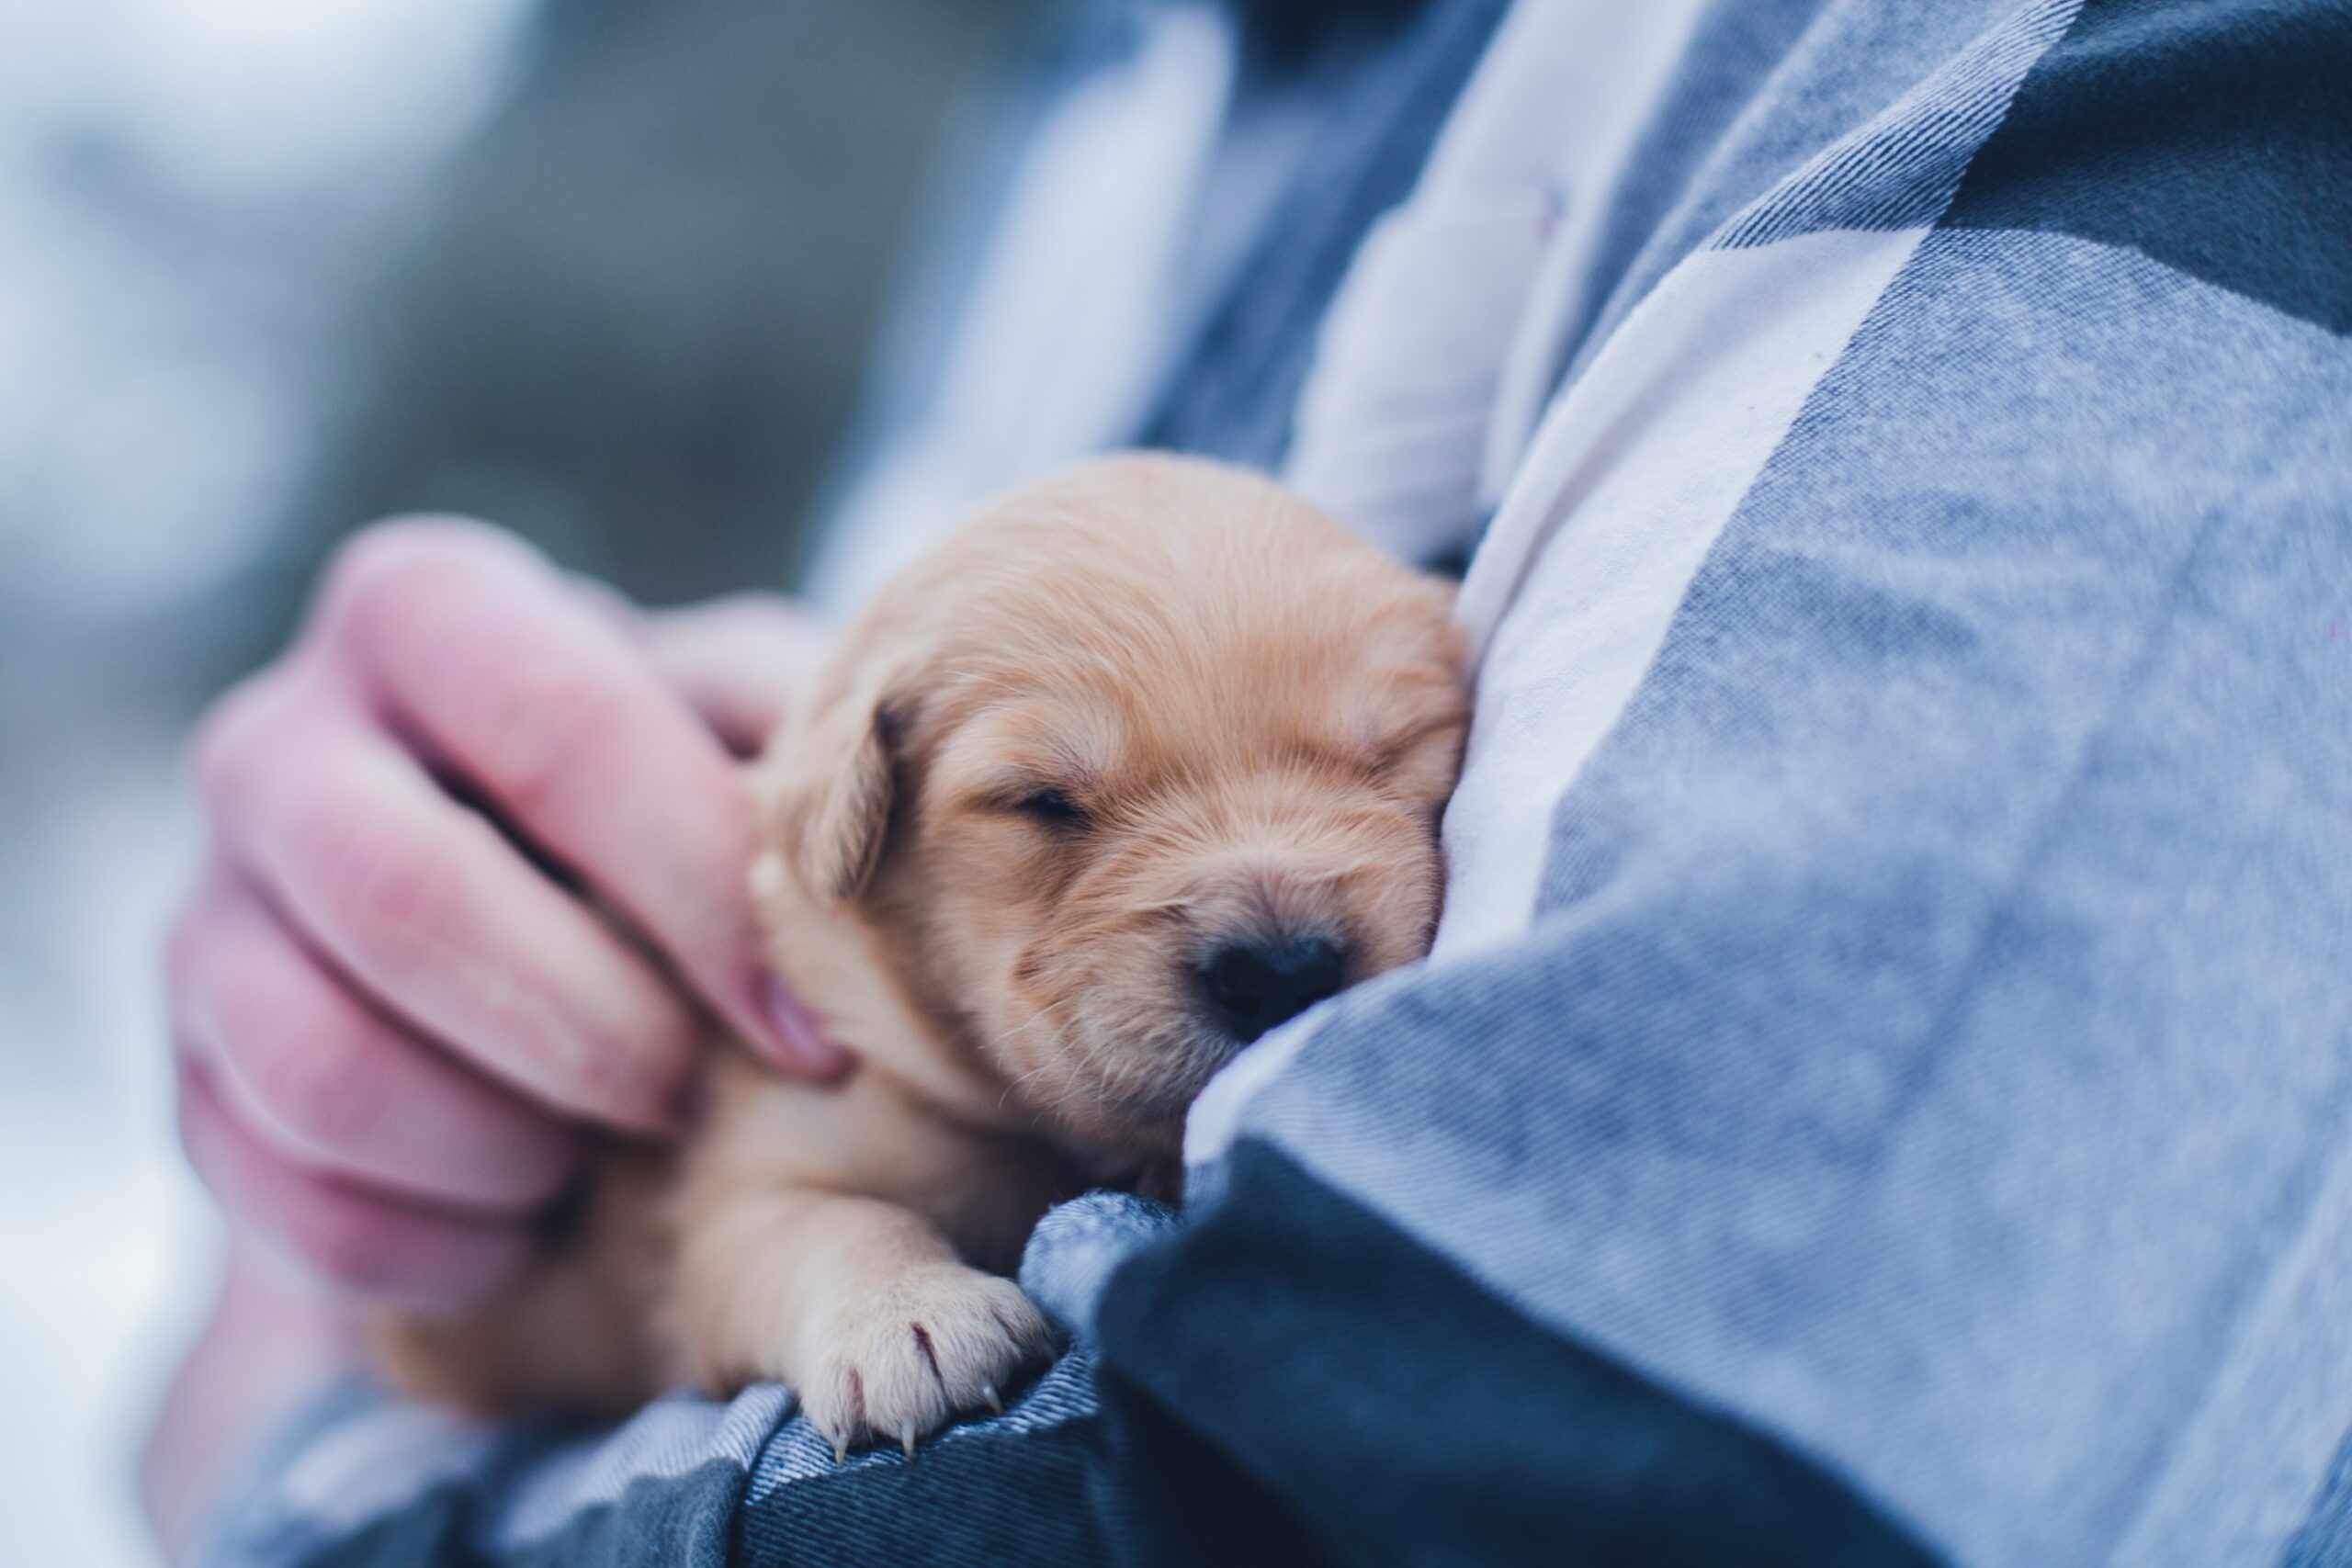 Puppy sleeping in someones arms.